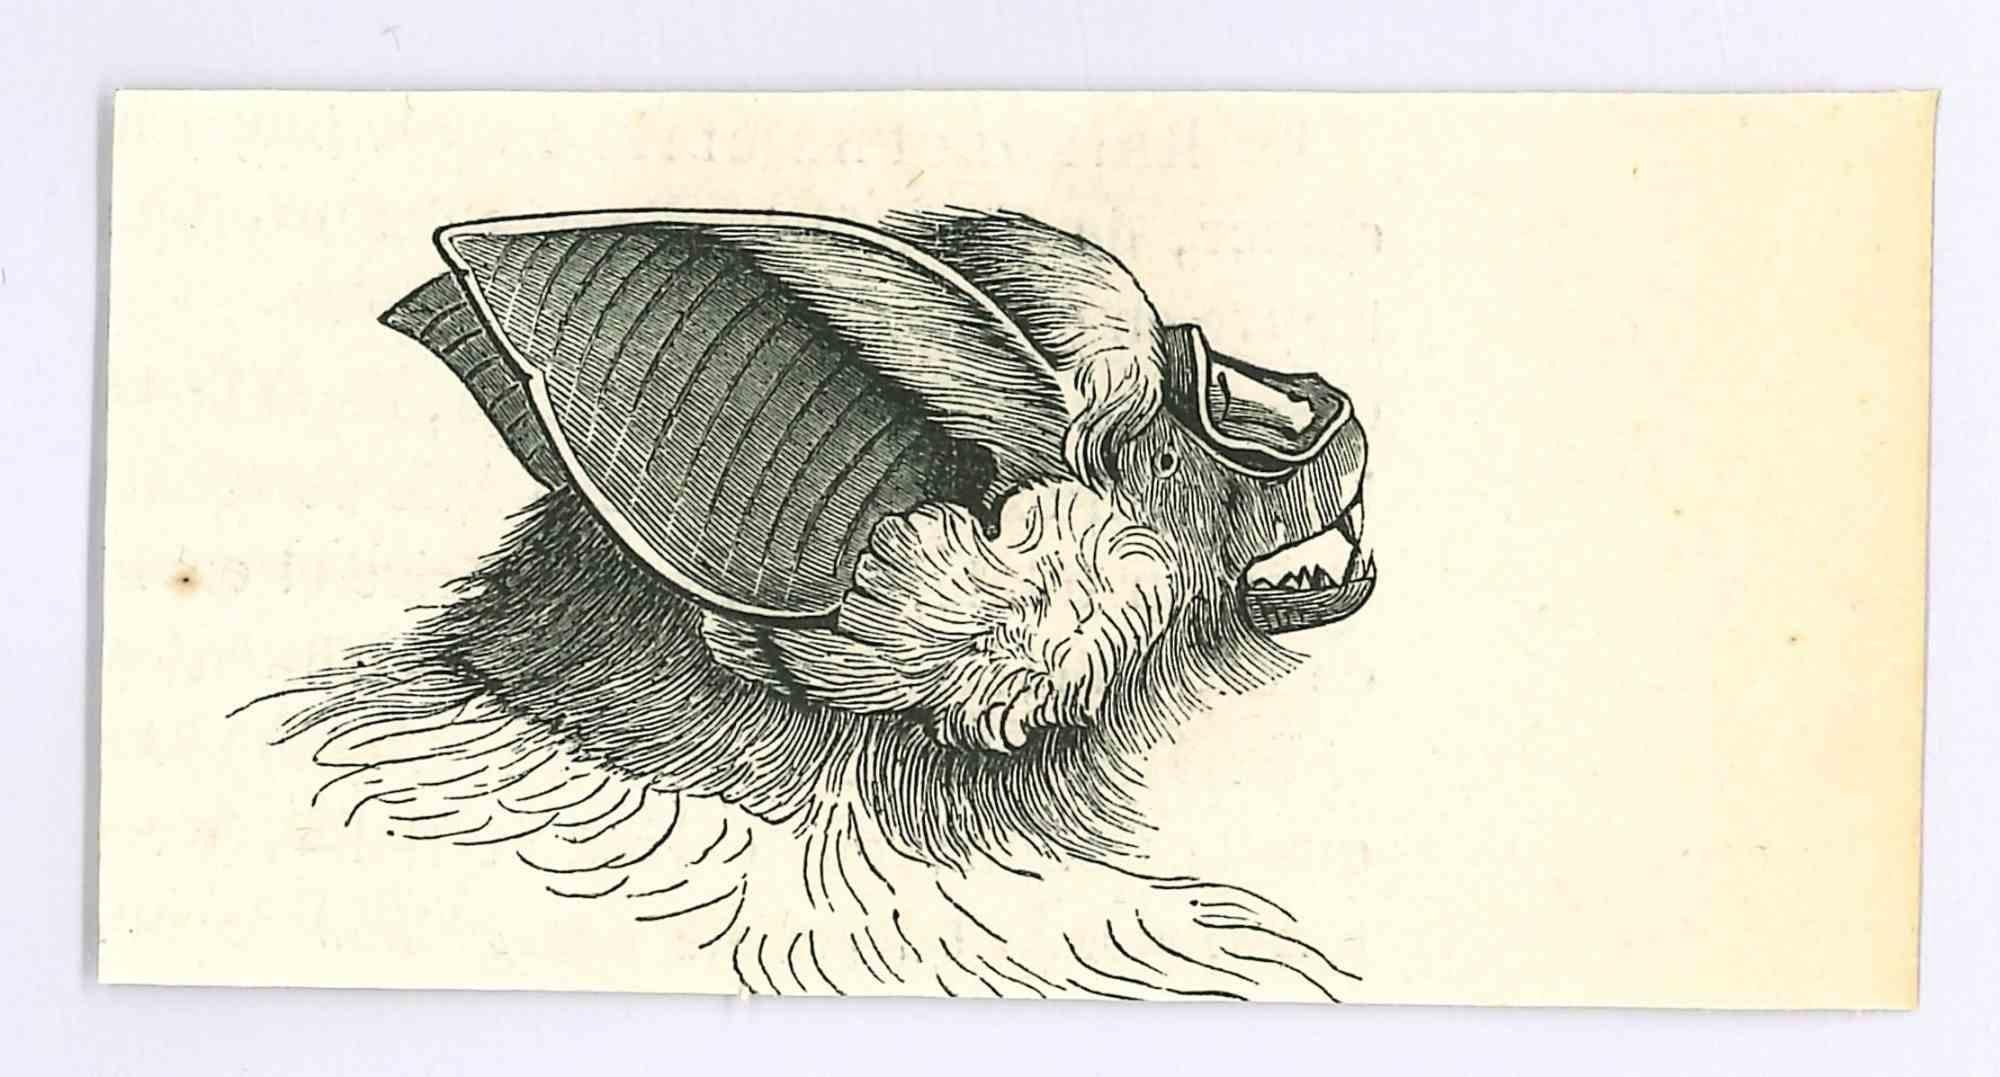 The Bat is an original lithograph on ivory-colored paper, realized by Paul Gervais (1816-1879). The artwork is from The Series of "Les Trois Règnes de la Nature", and was published in 1854.

Good conditions.

Titled on the lower. With the notes on